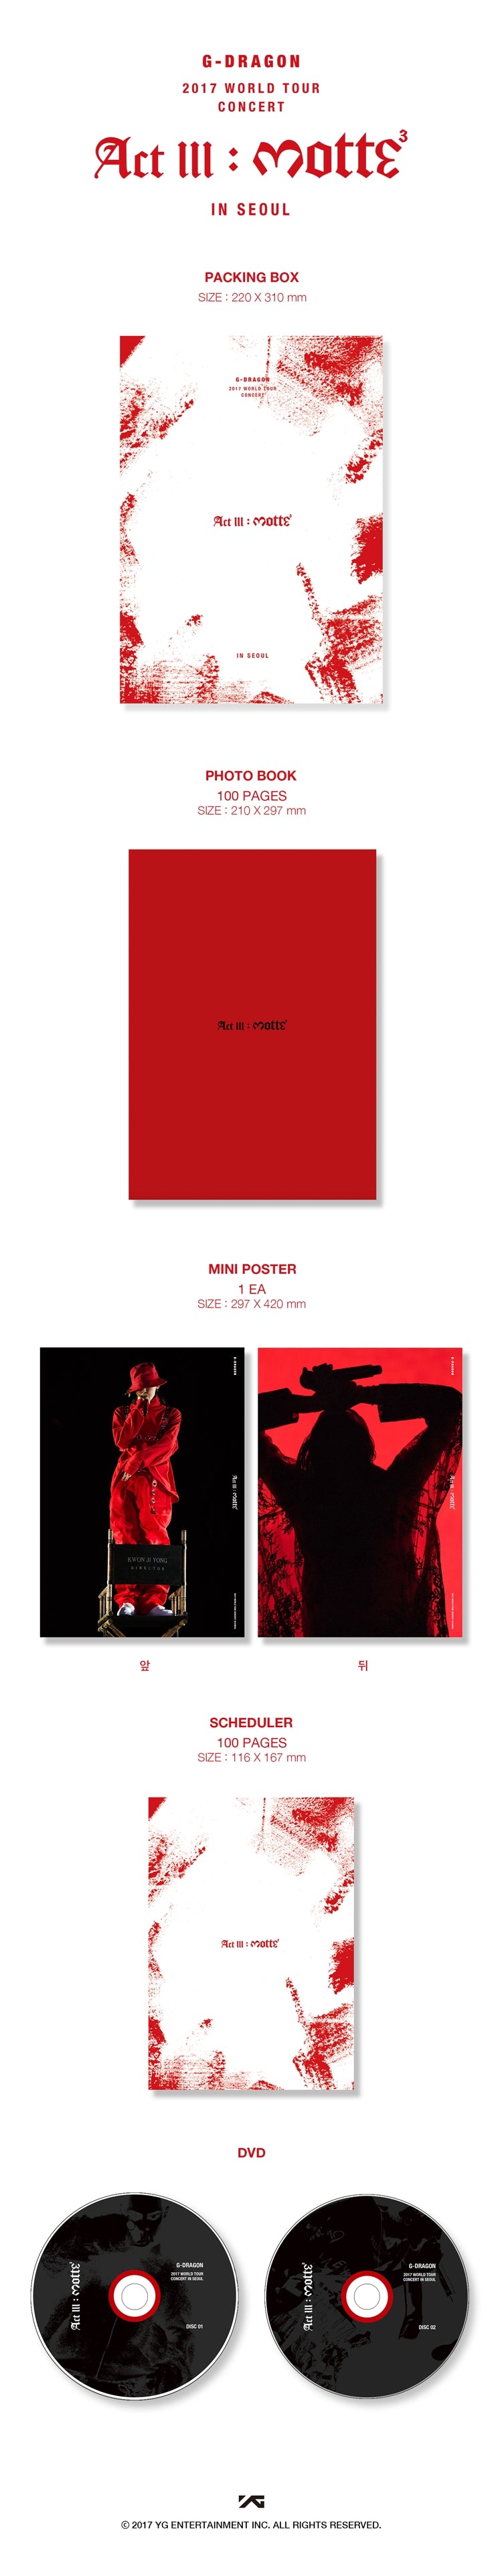 GD-[2017 G-Dragon Concert Act III, M.O.T.T.E In Seoul] DVD+Poster(On)+Card+etc